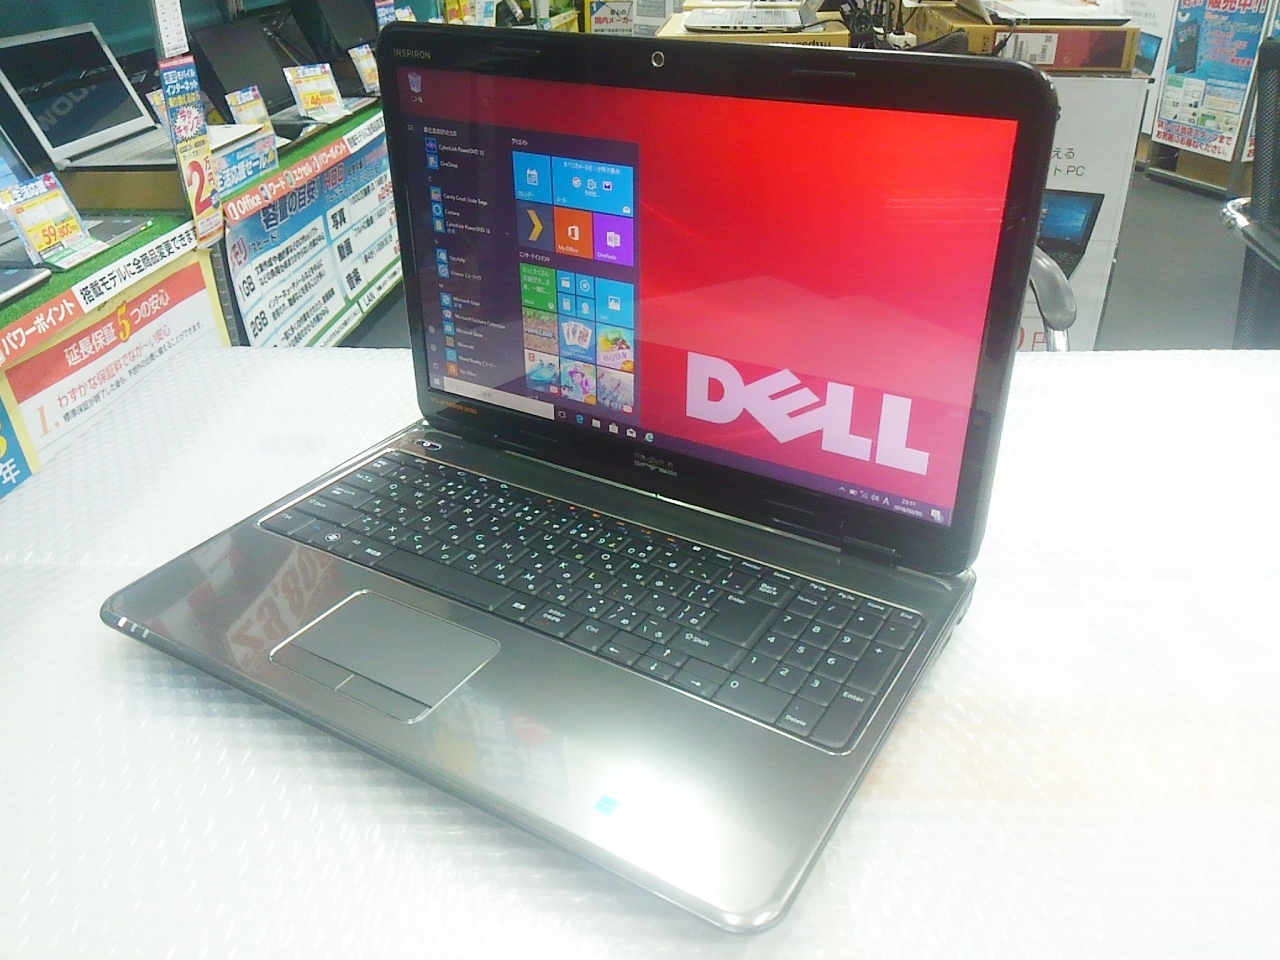 DELL INSPIRON N5010 (Core i3 2.53GHz/4GB/320GB) 中古ノートパソコン